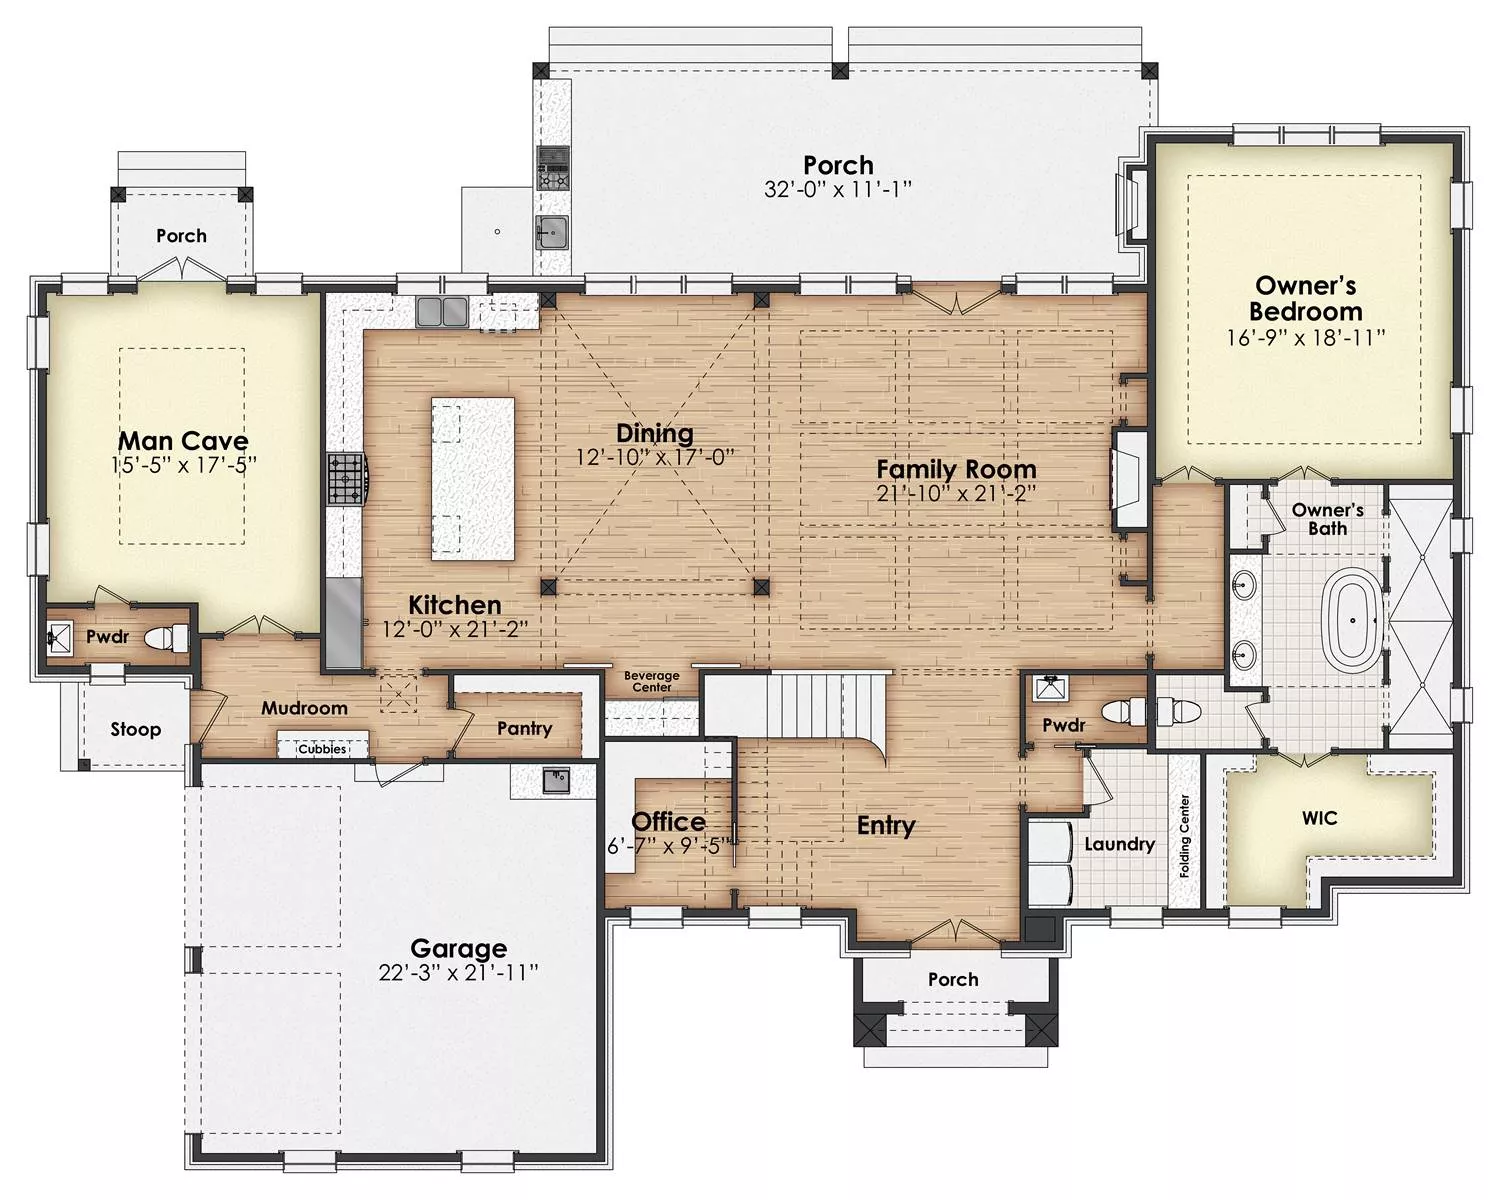 House Design Styles – Find House Plans & Designs by Style 